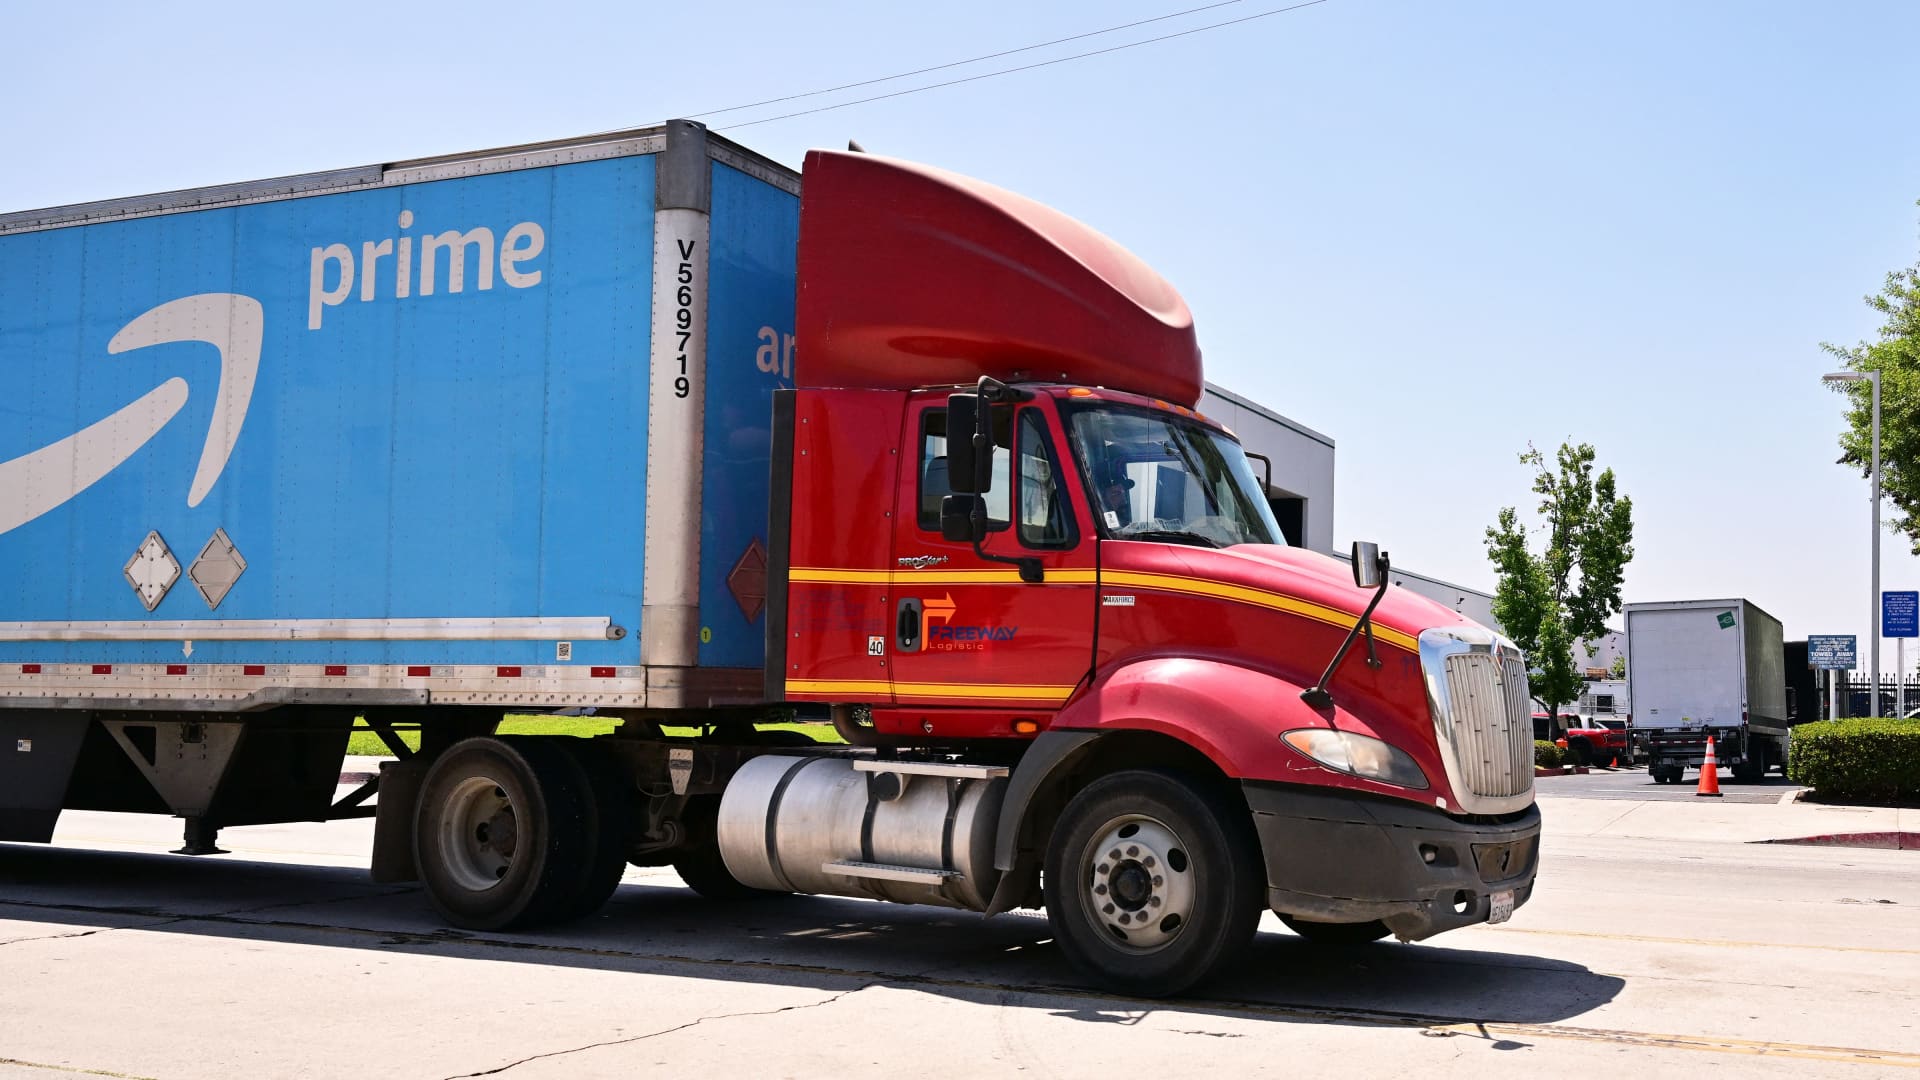 An Amazon Prime truck driver is seen in Los Angeles, California on Amazon Prime Day, July 12, 2022.